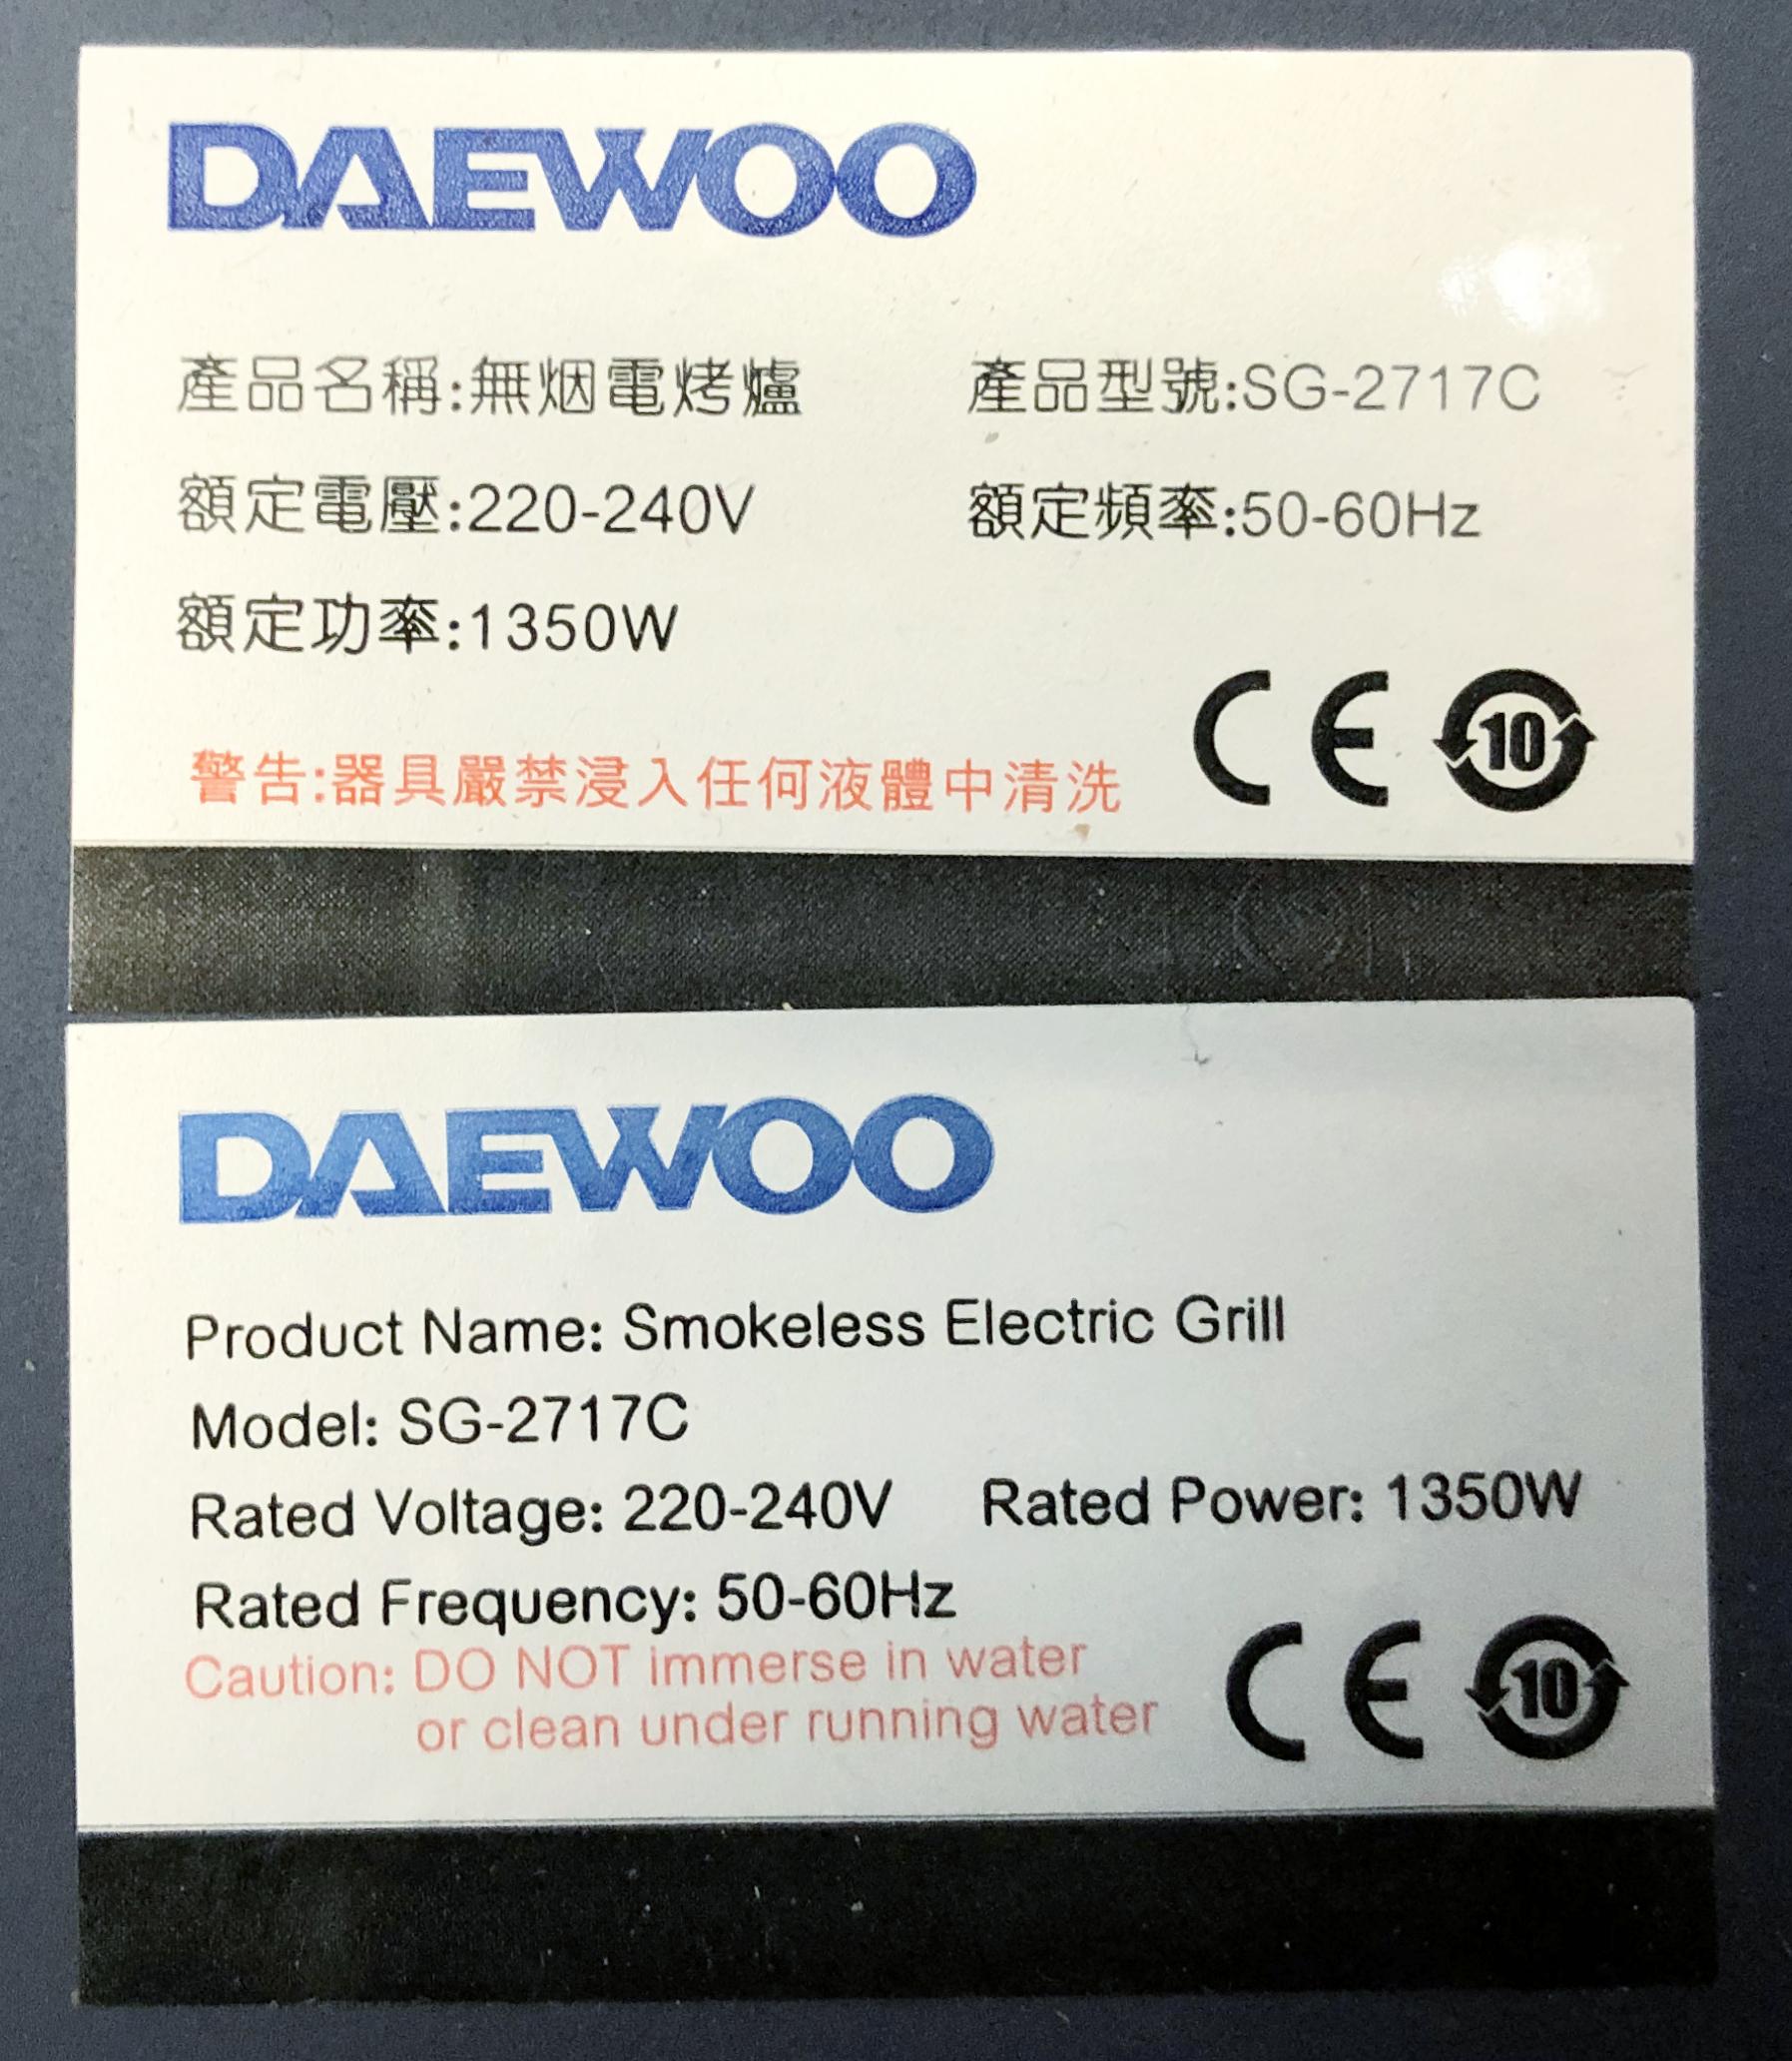 The Electrical and Mechanical Services Department today (March 15) urged the public to stop using Daewoo electric grills with the model number of SG-2717C and a blue enclosure. Photo shows the product marking at the bottom of the electric grill concerned.